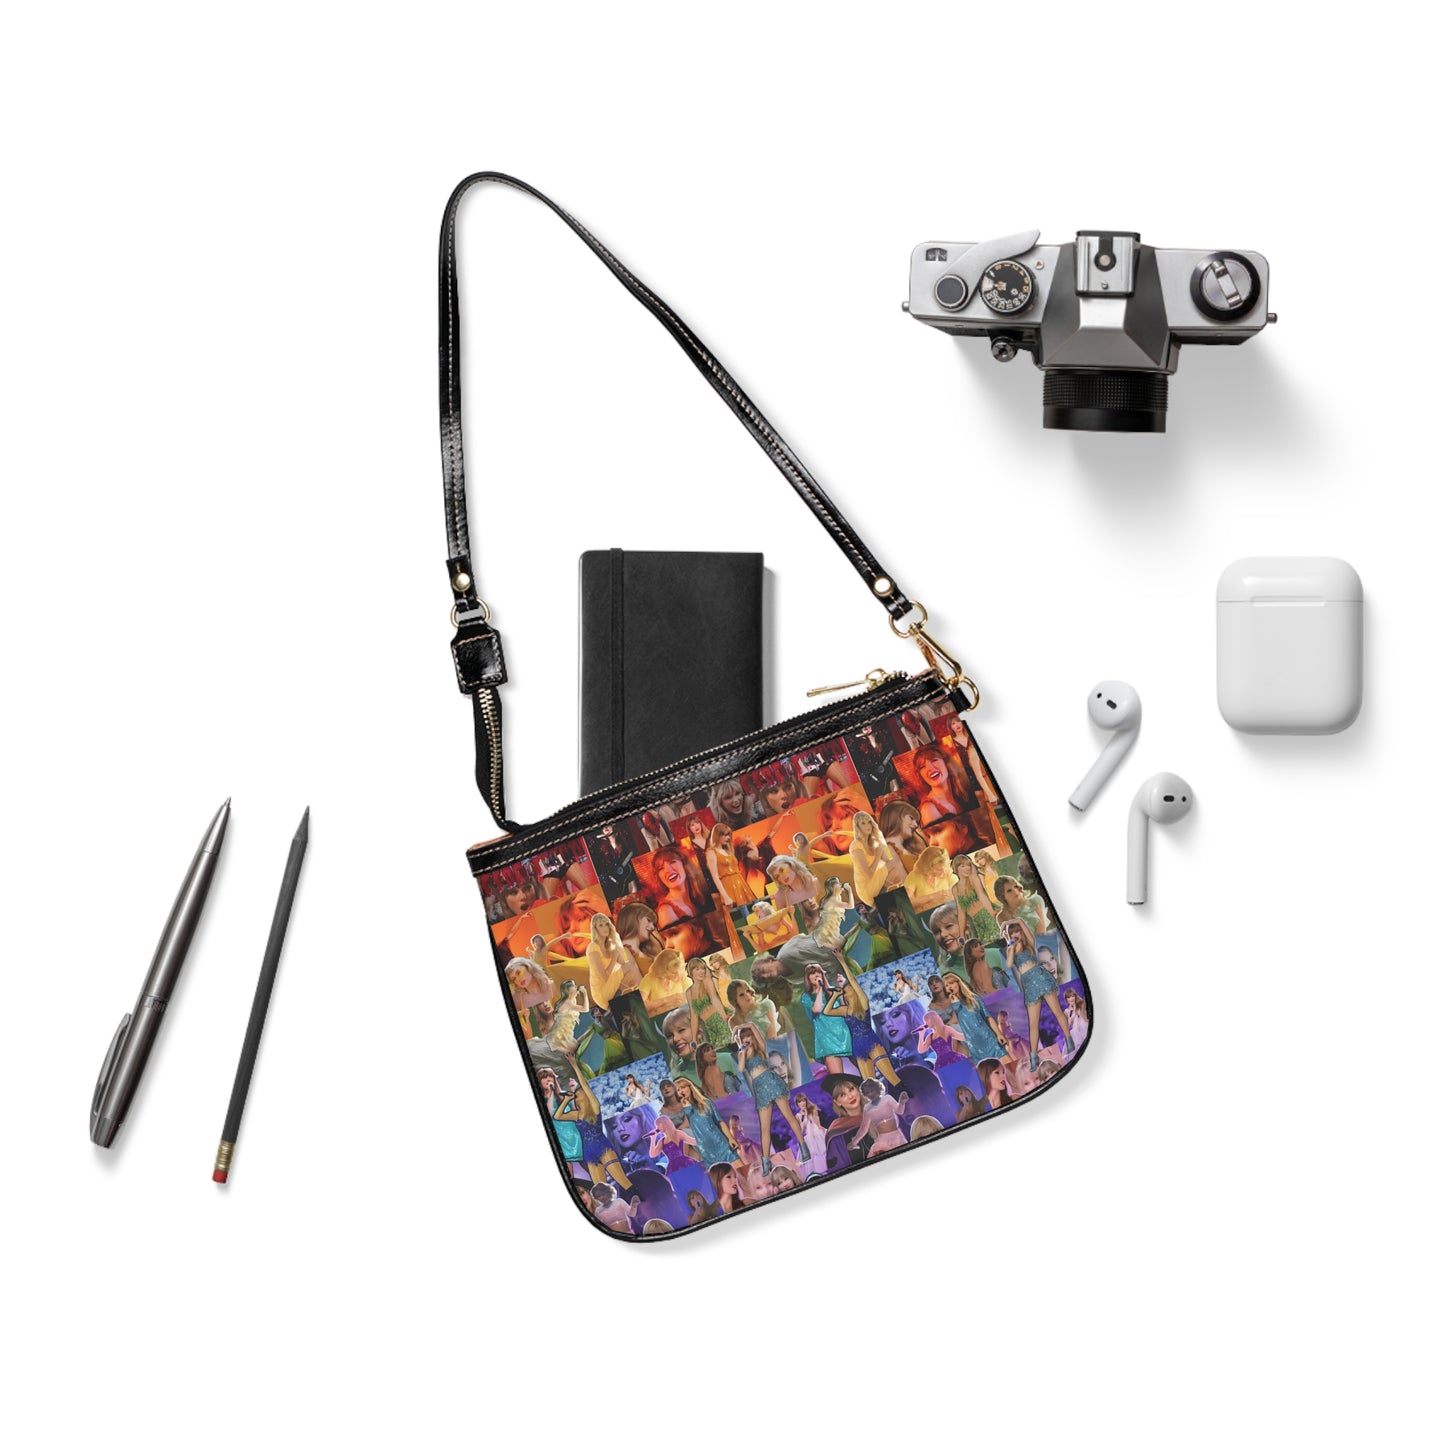 Taylor Swift Rainbow Photo Collage Small Shoulder Bag